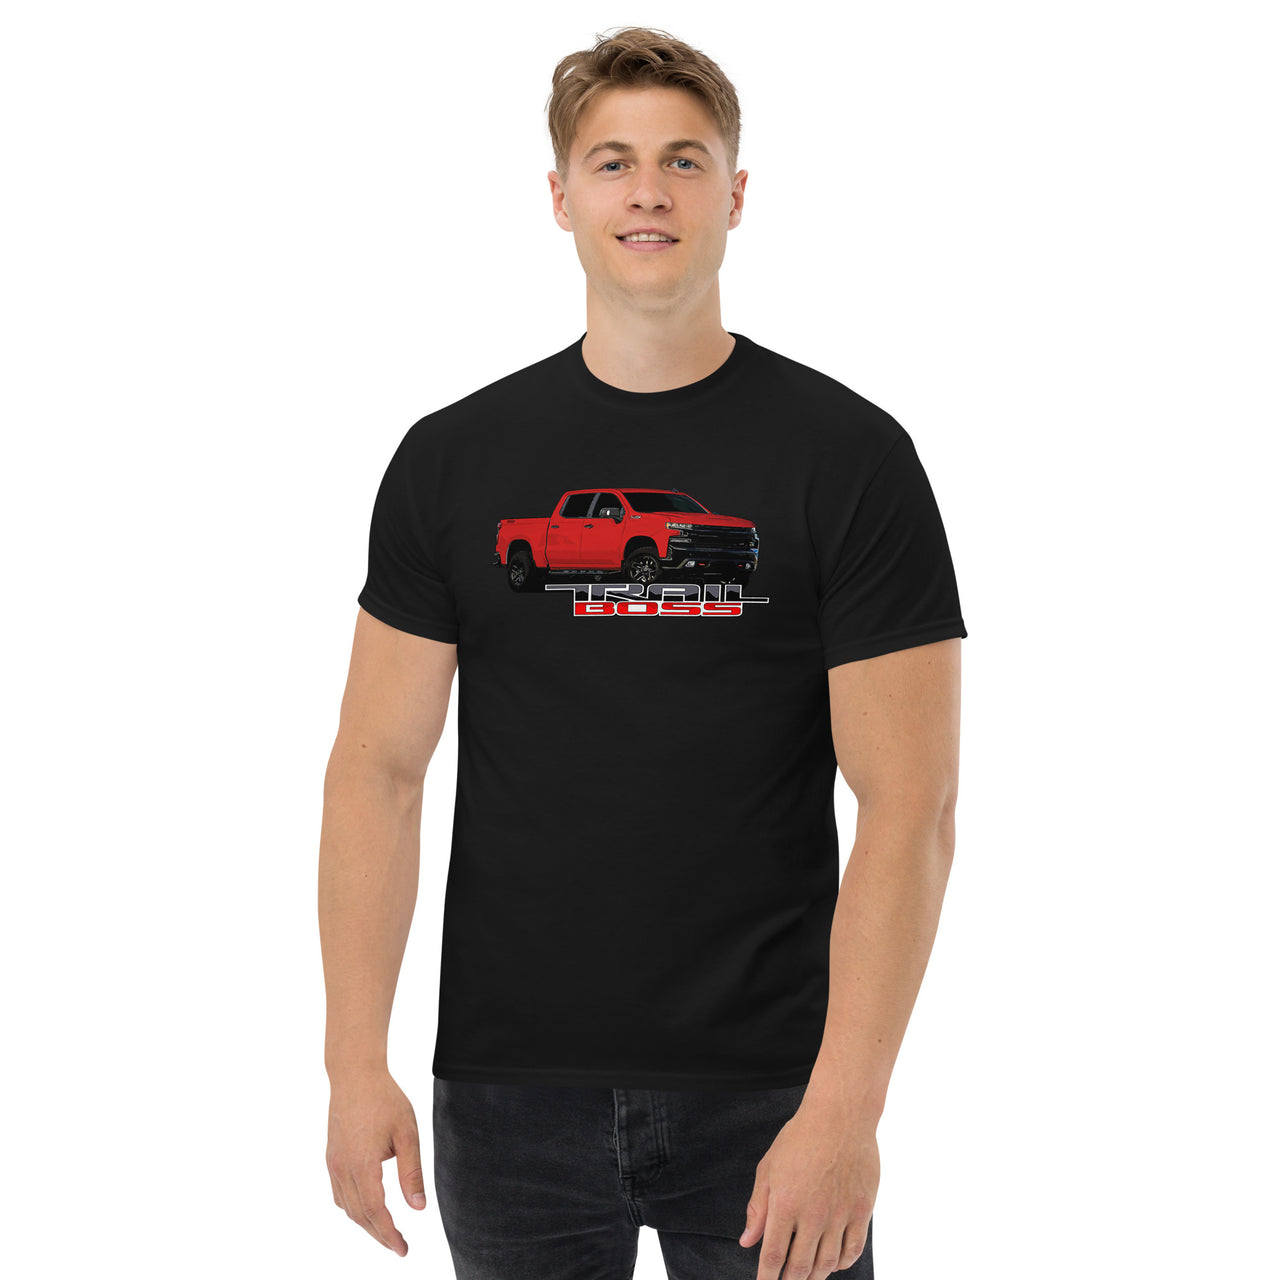 Red Trail Boss Truck T-Shirt modeled in black